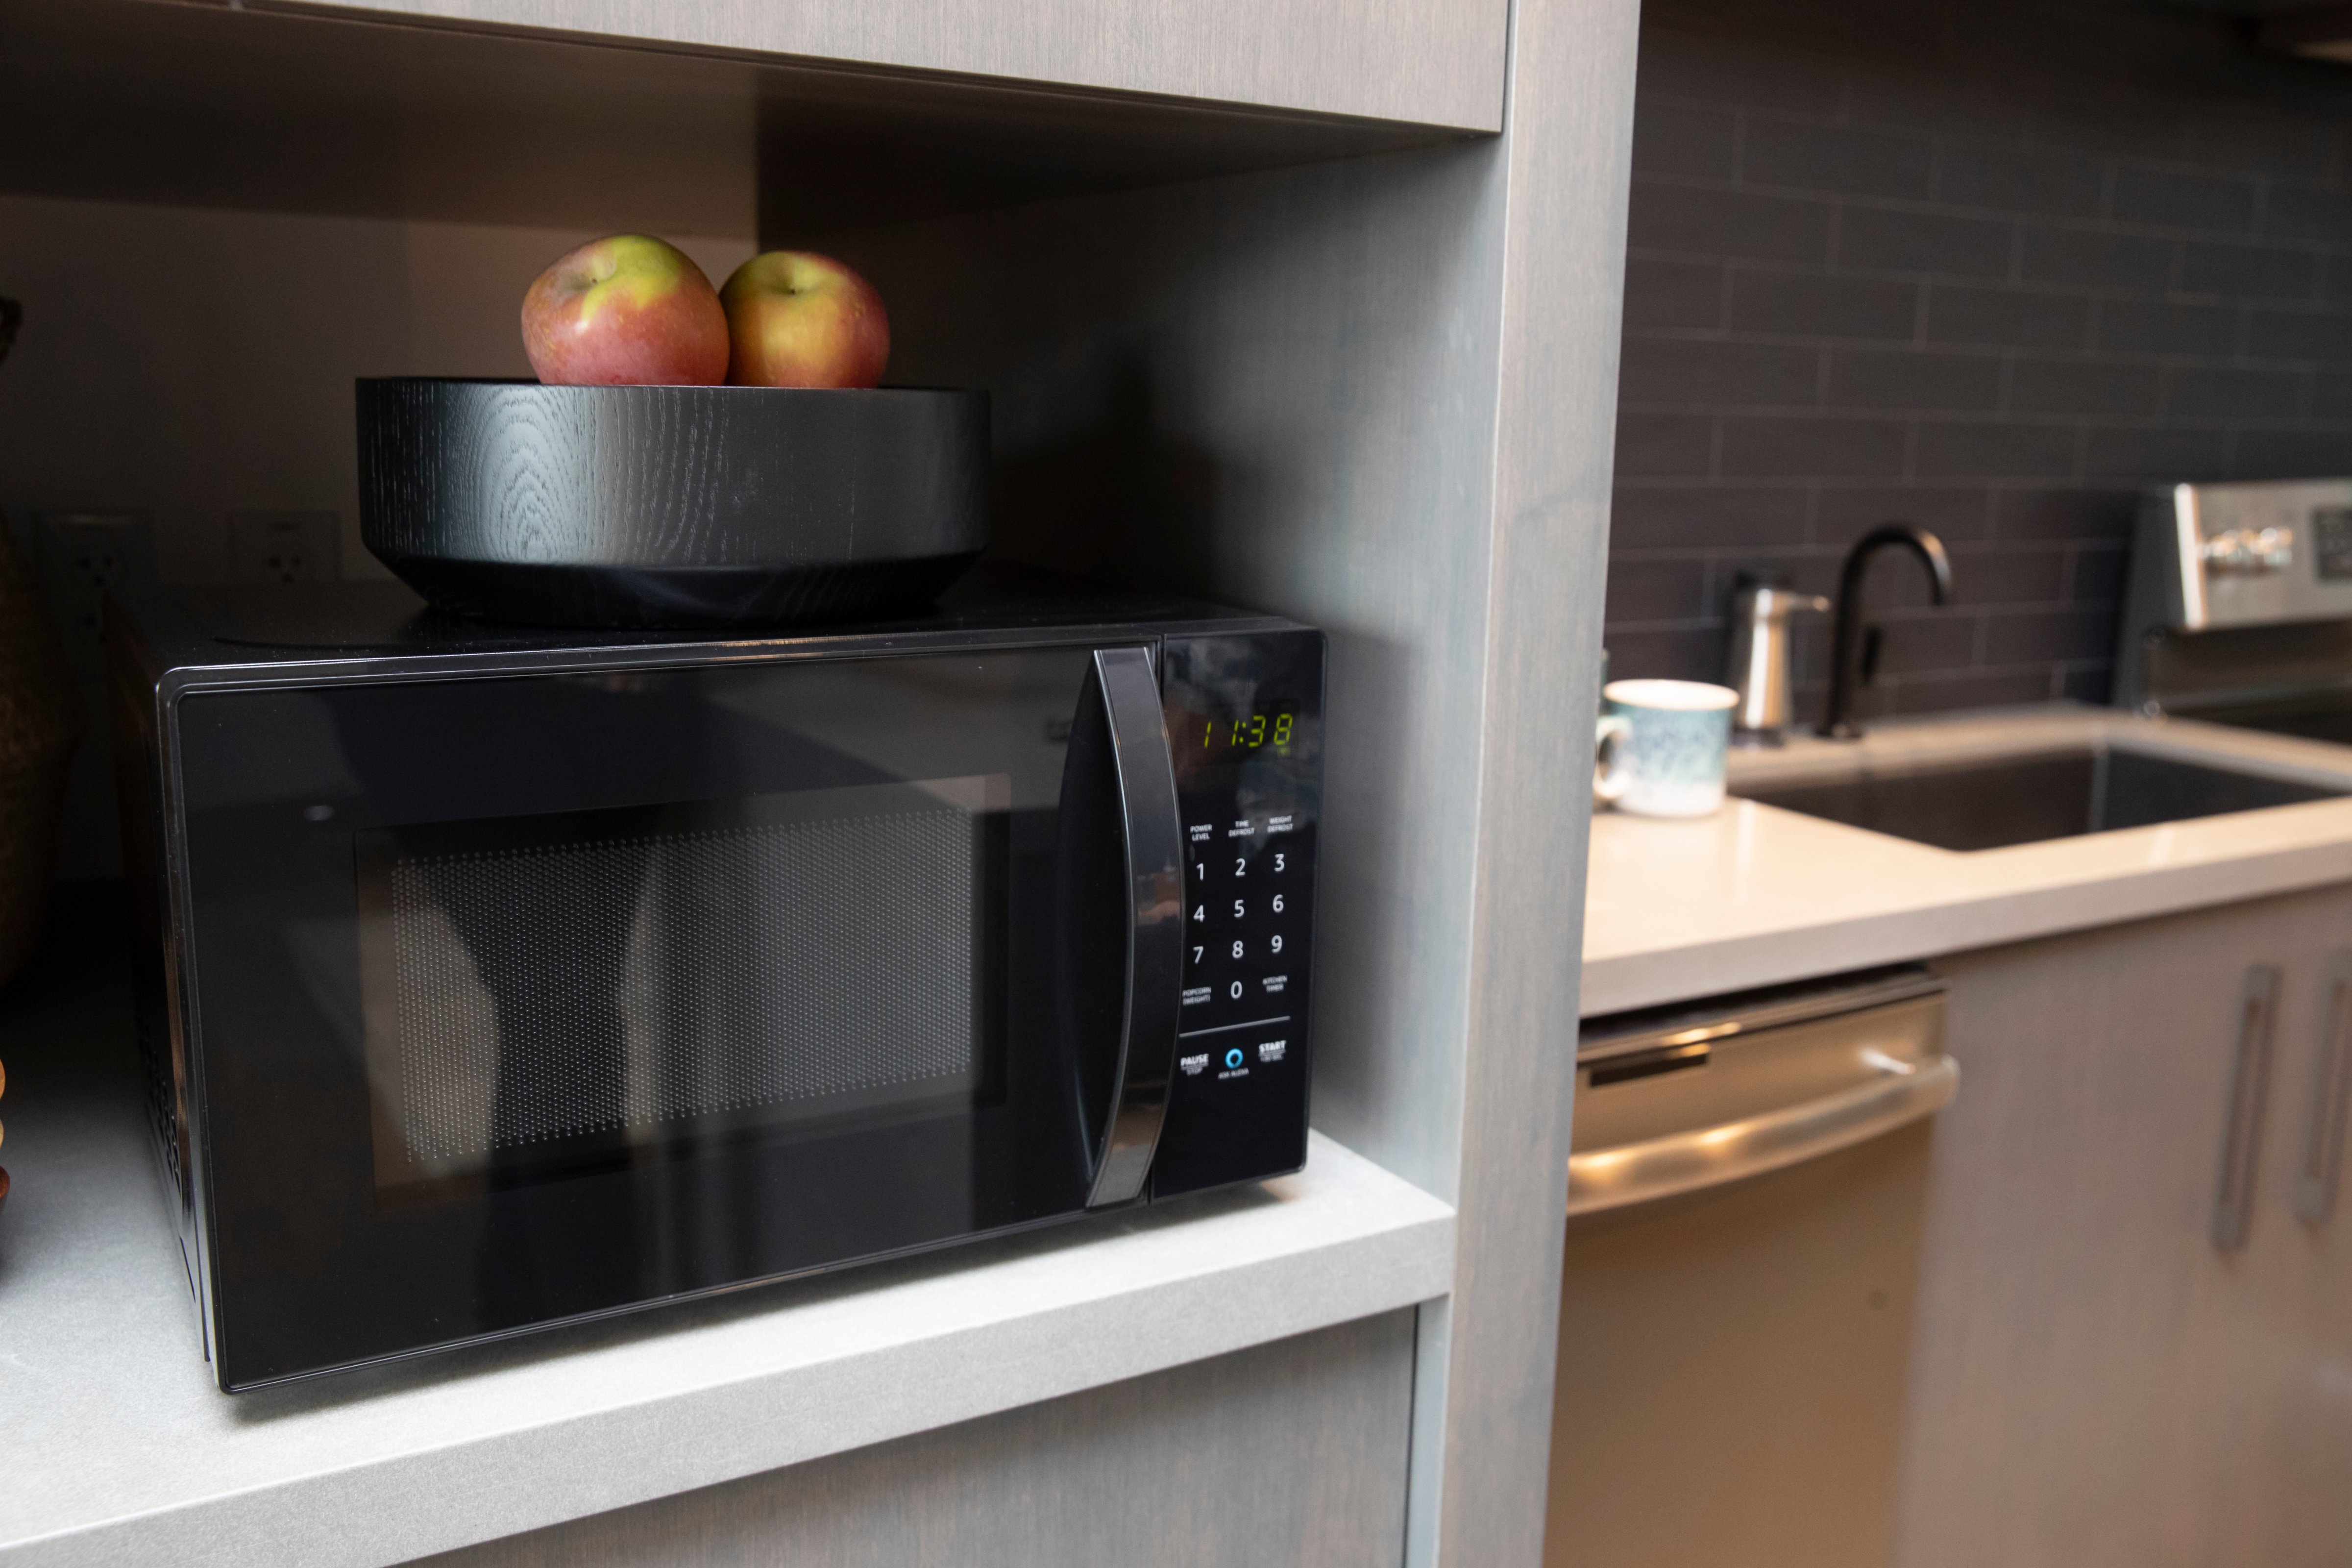 An "Amazonbasics Microwave," which can be controlled by Alexa, is pictured at  Amazon Headquarters shortly after being launched, on September 20, 2018 in Seattle Washington. (Stephen Brashear&mdash;Getty Images)